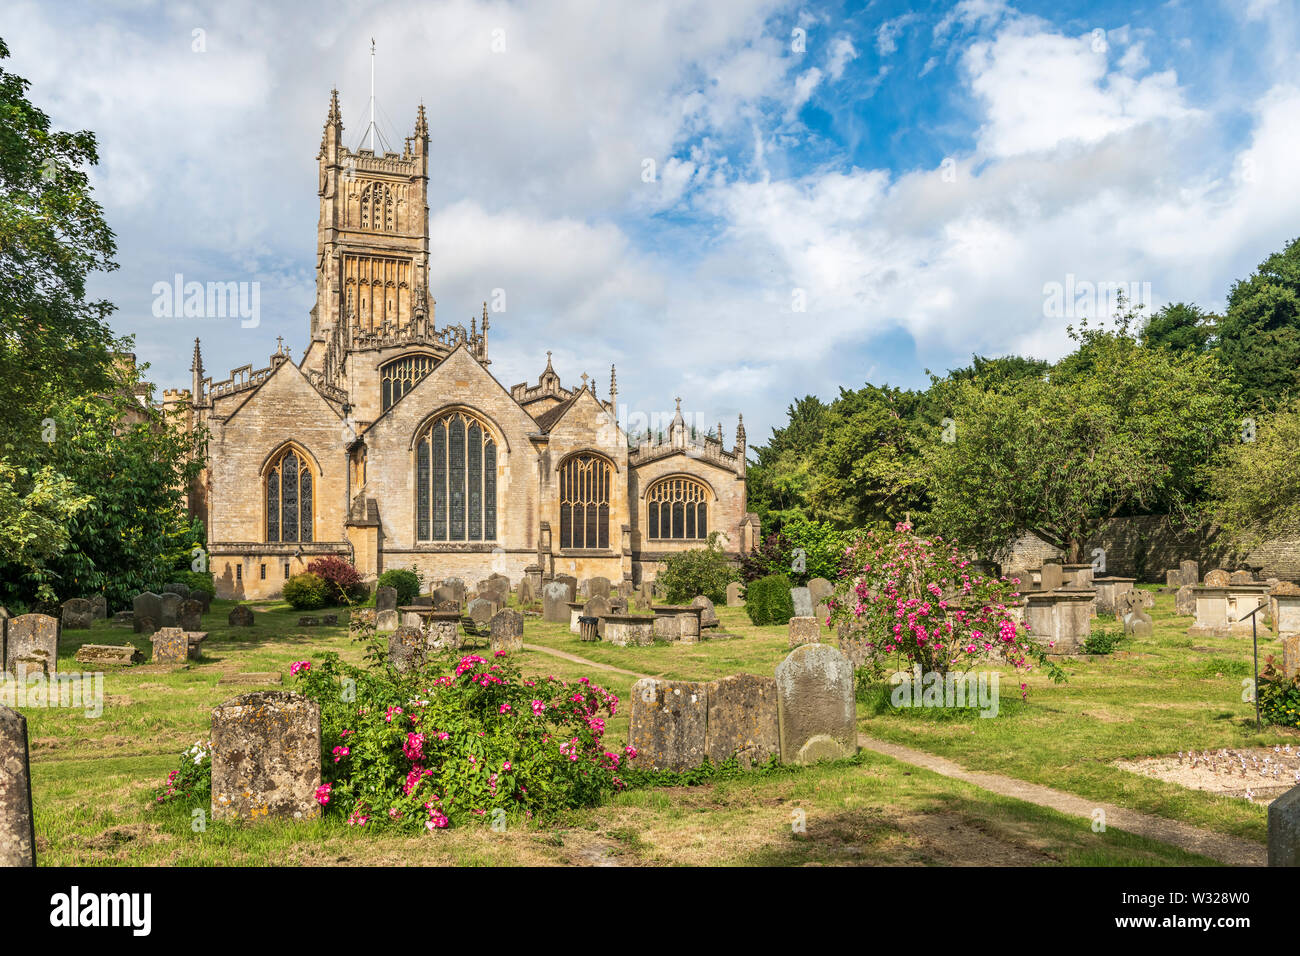 St John the Baptist Church is the landmark centrepiece of the marketplace in the beautiful Cotswold town of Cirencester in Gloucestershire. Stock Photo